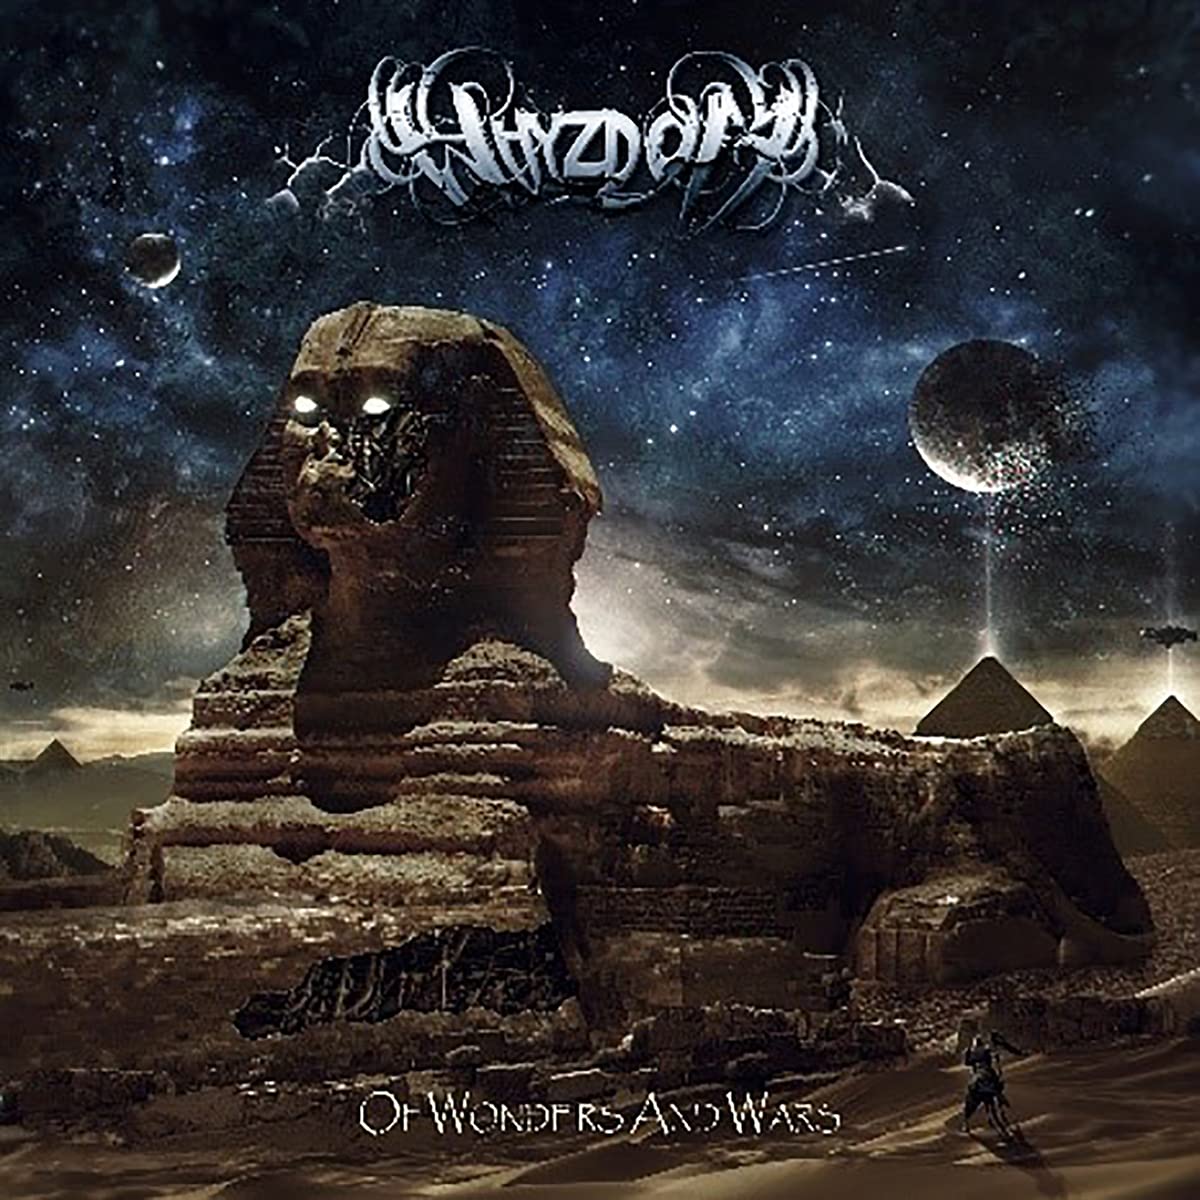 Whyzdom-Of Wonders and Wars-(SC 399-0)-CD-FLAC-2021-WRE